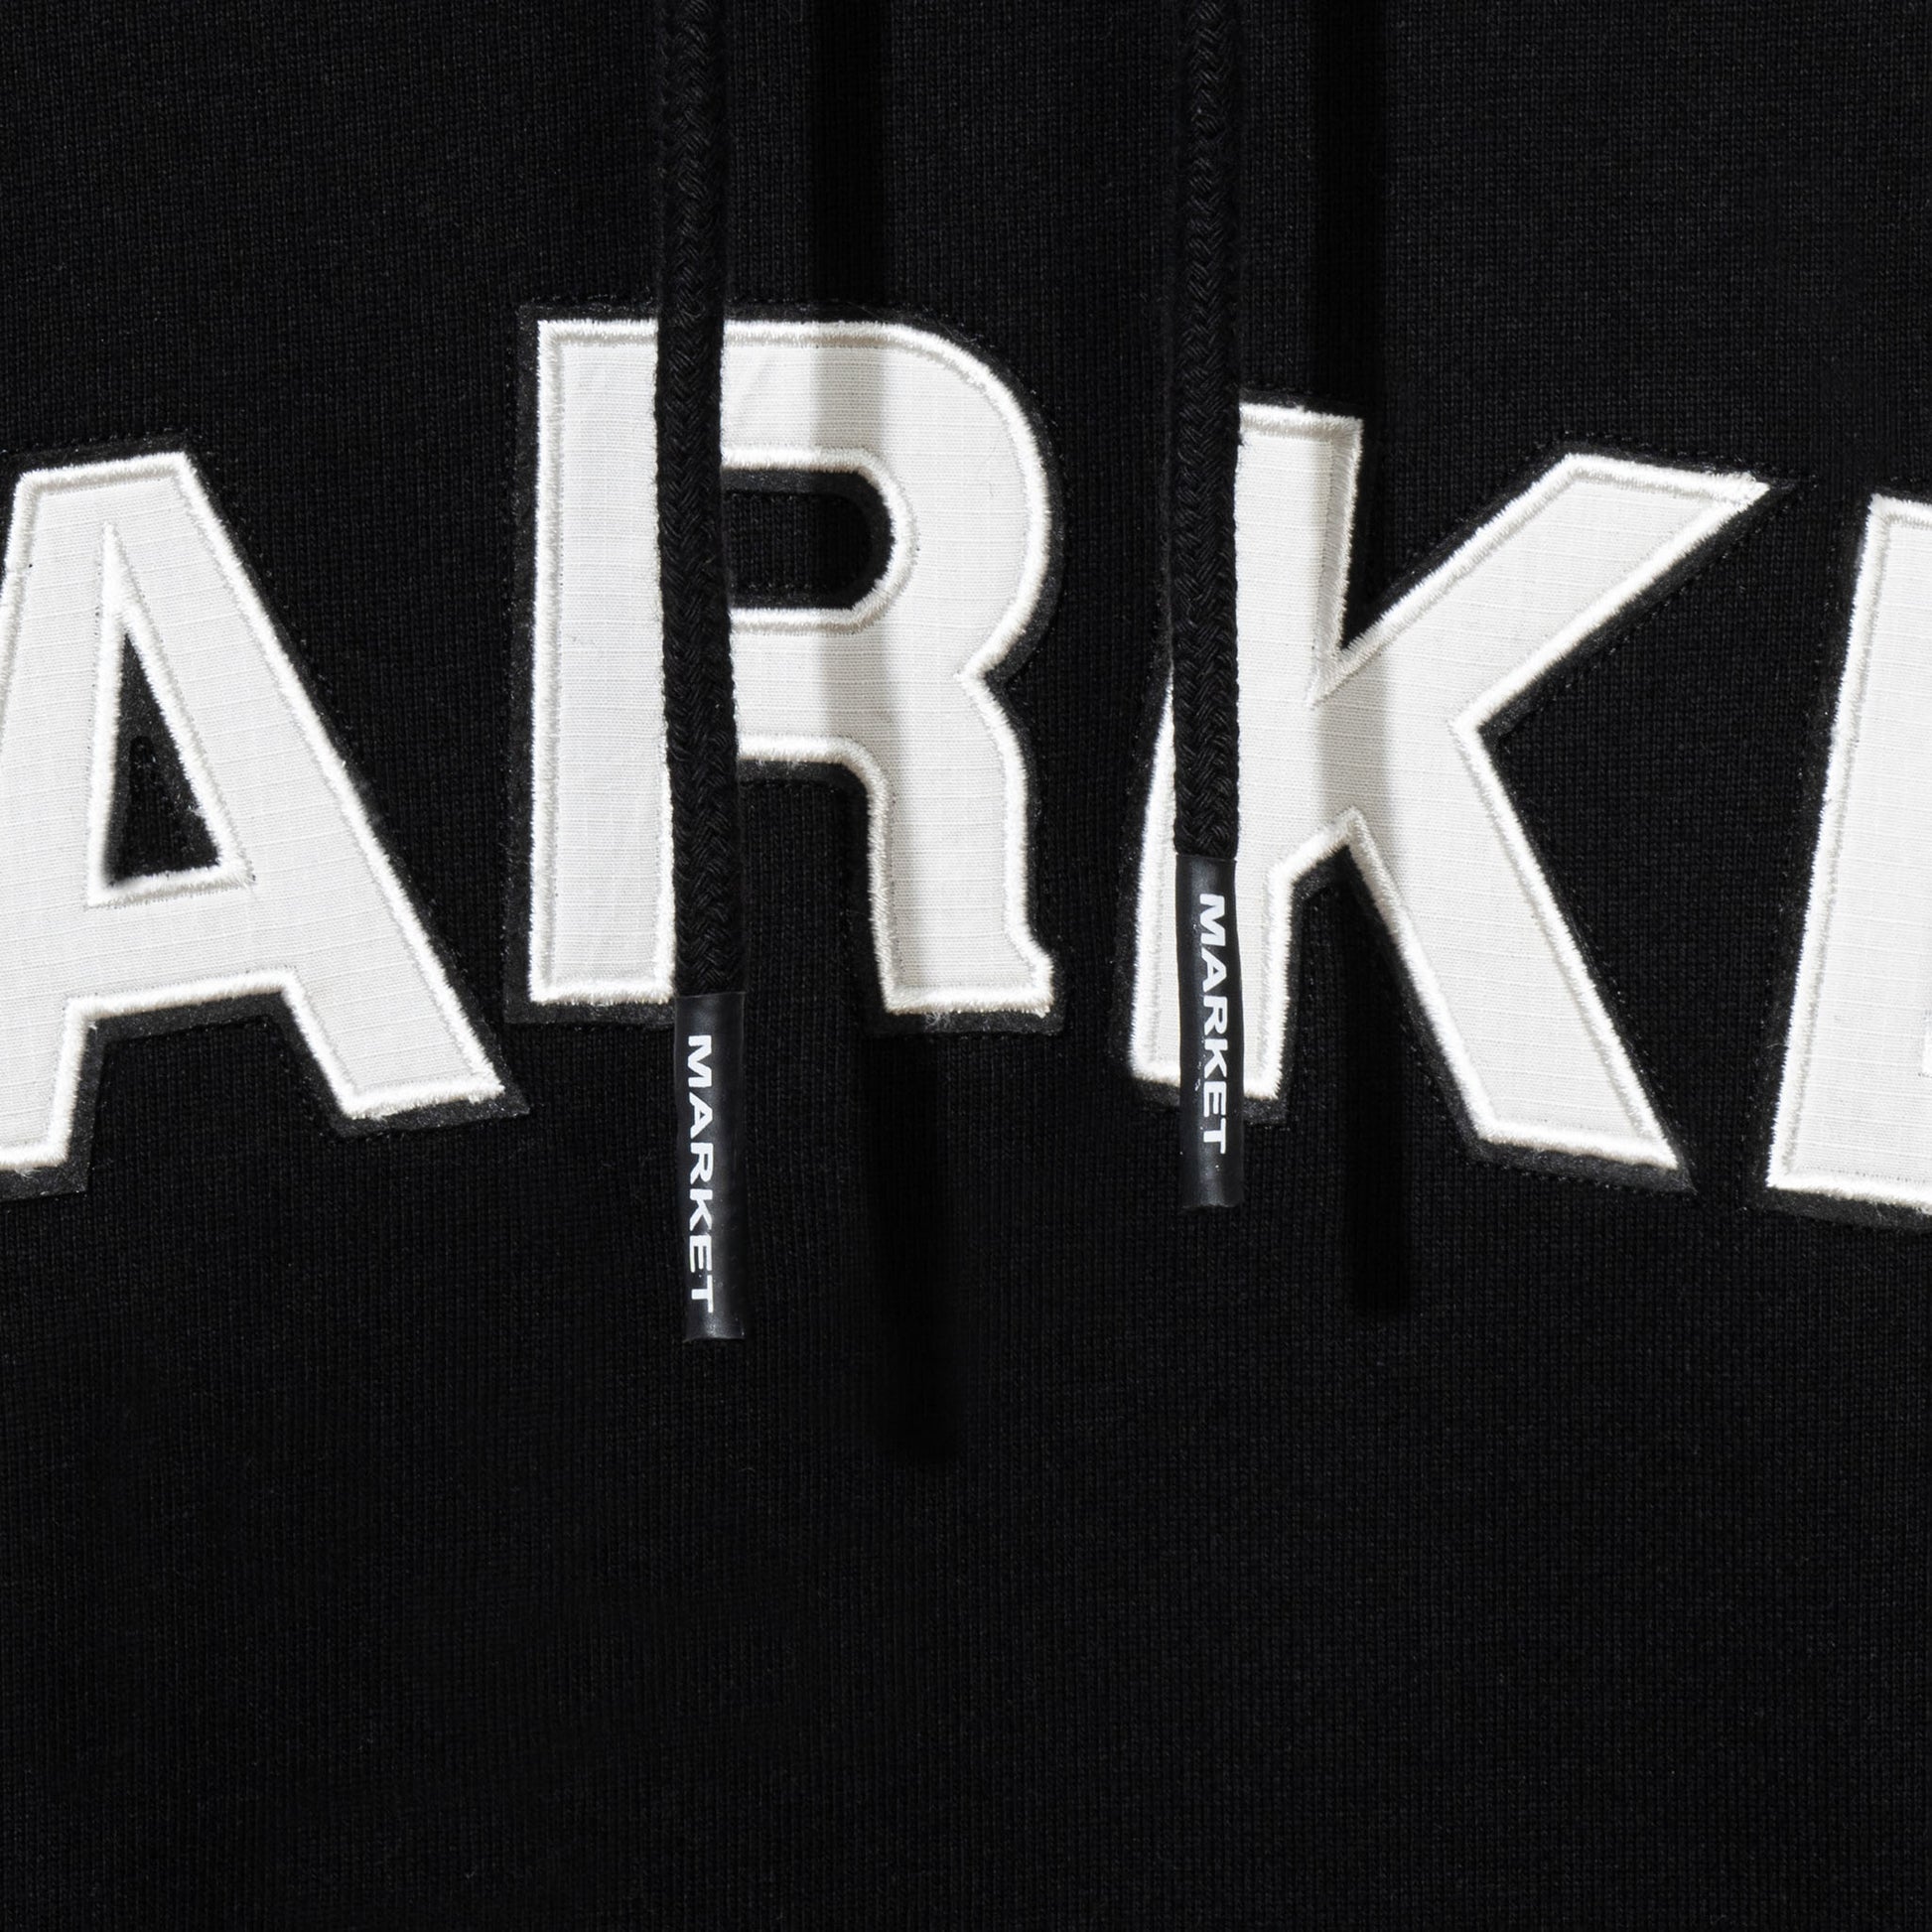 MARKET clothing brand COMMUNITY GARDEN HOODIE. Find more graphic tees, hats and more at MarketStudios.com. Formally Chinatown Market.